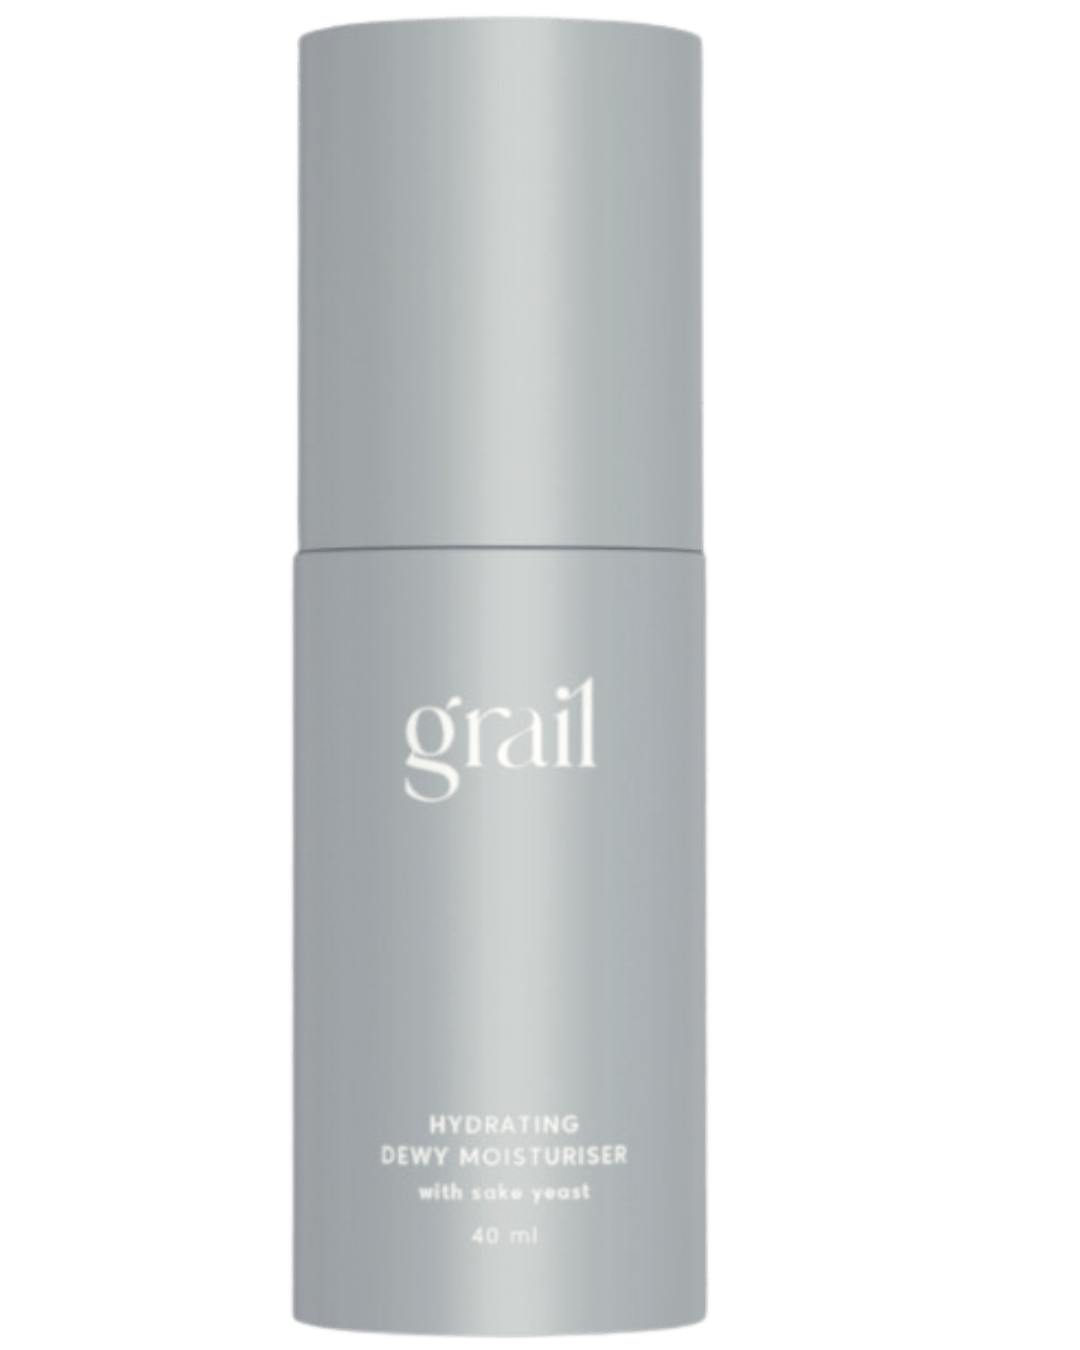 Daily Vanity Beauty Awards 2024 Best Skincare Grail Skin Dewy Moisturiser Voted By Beauty Experts